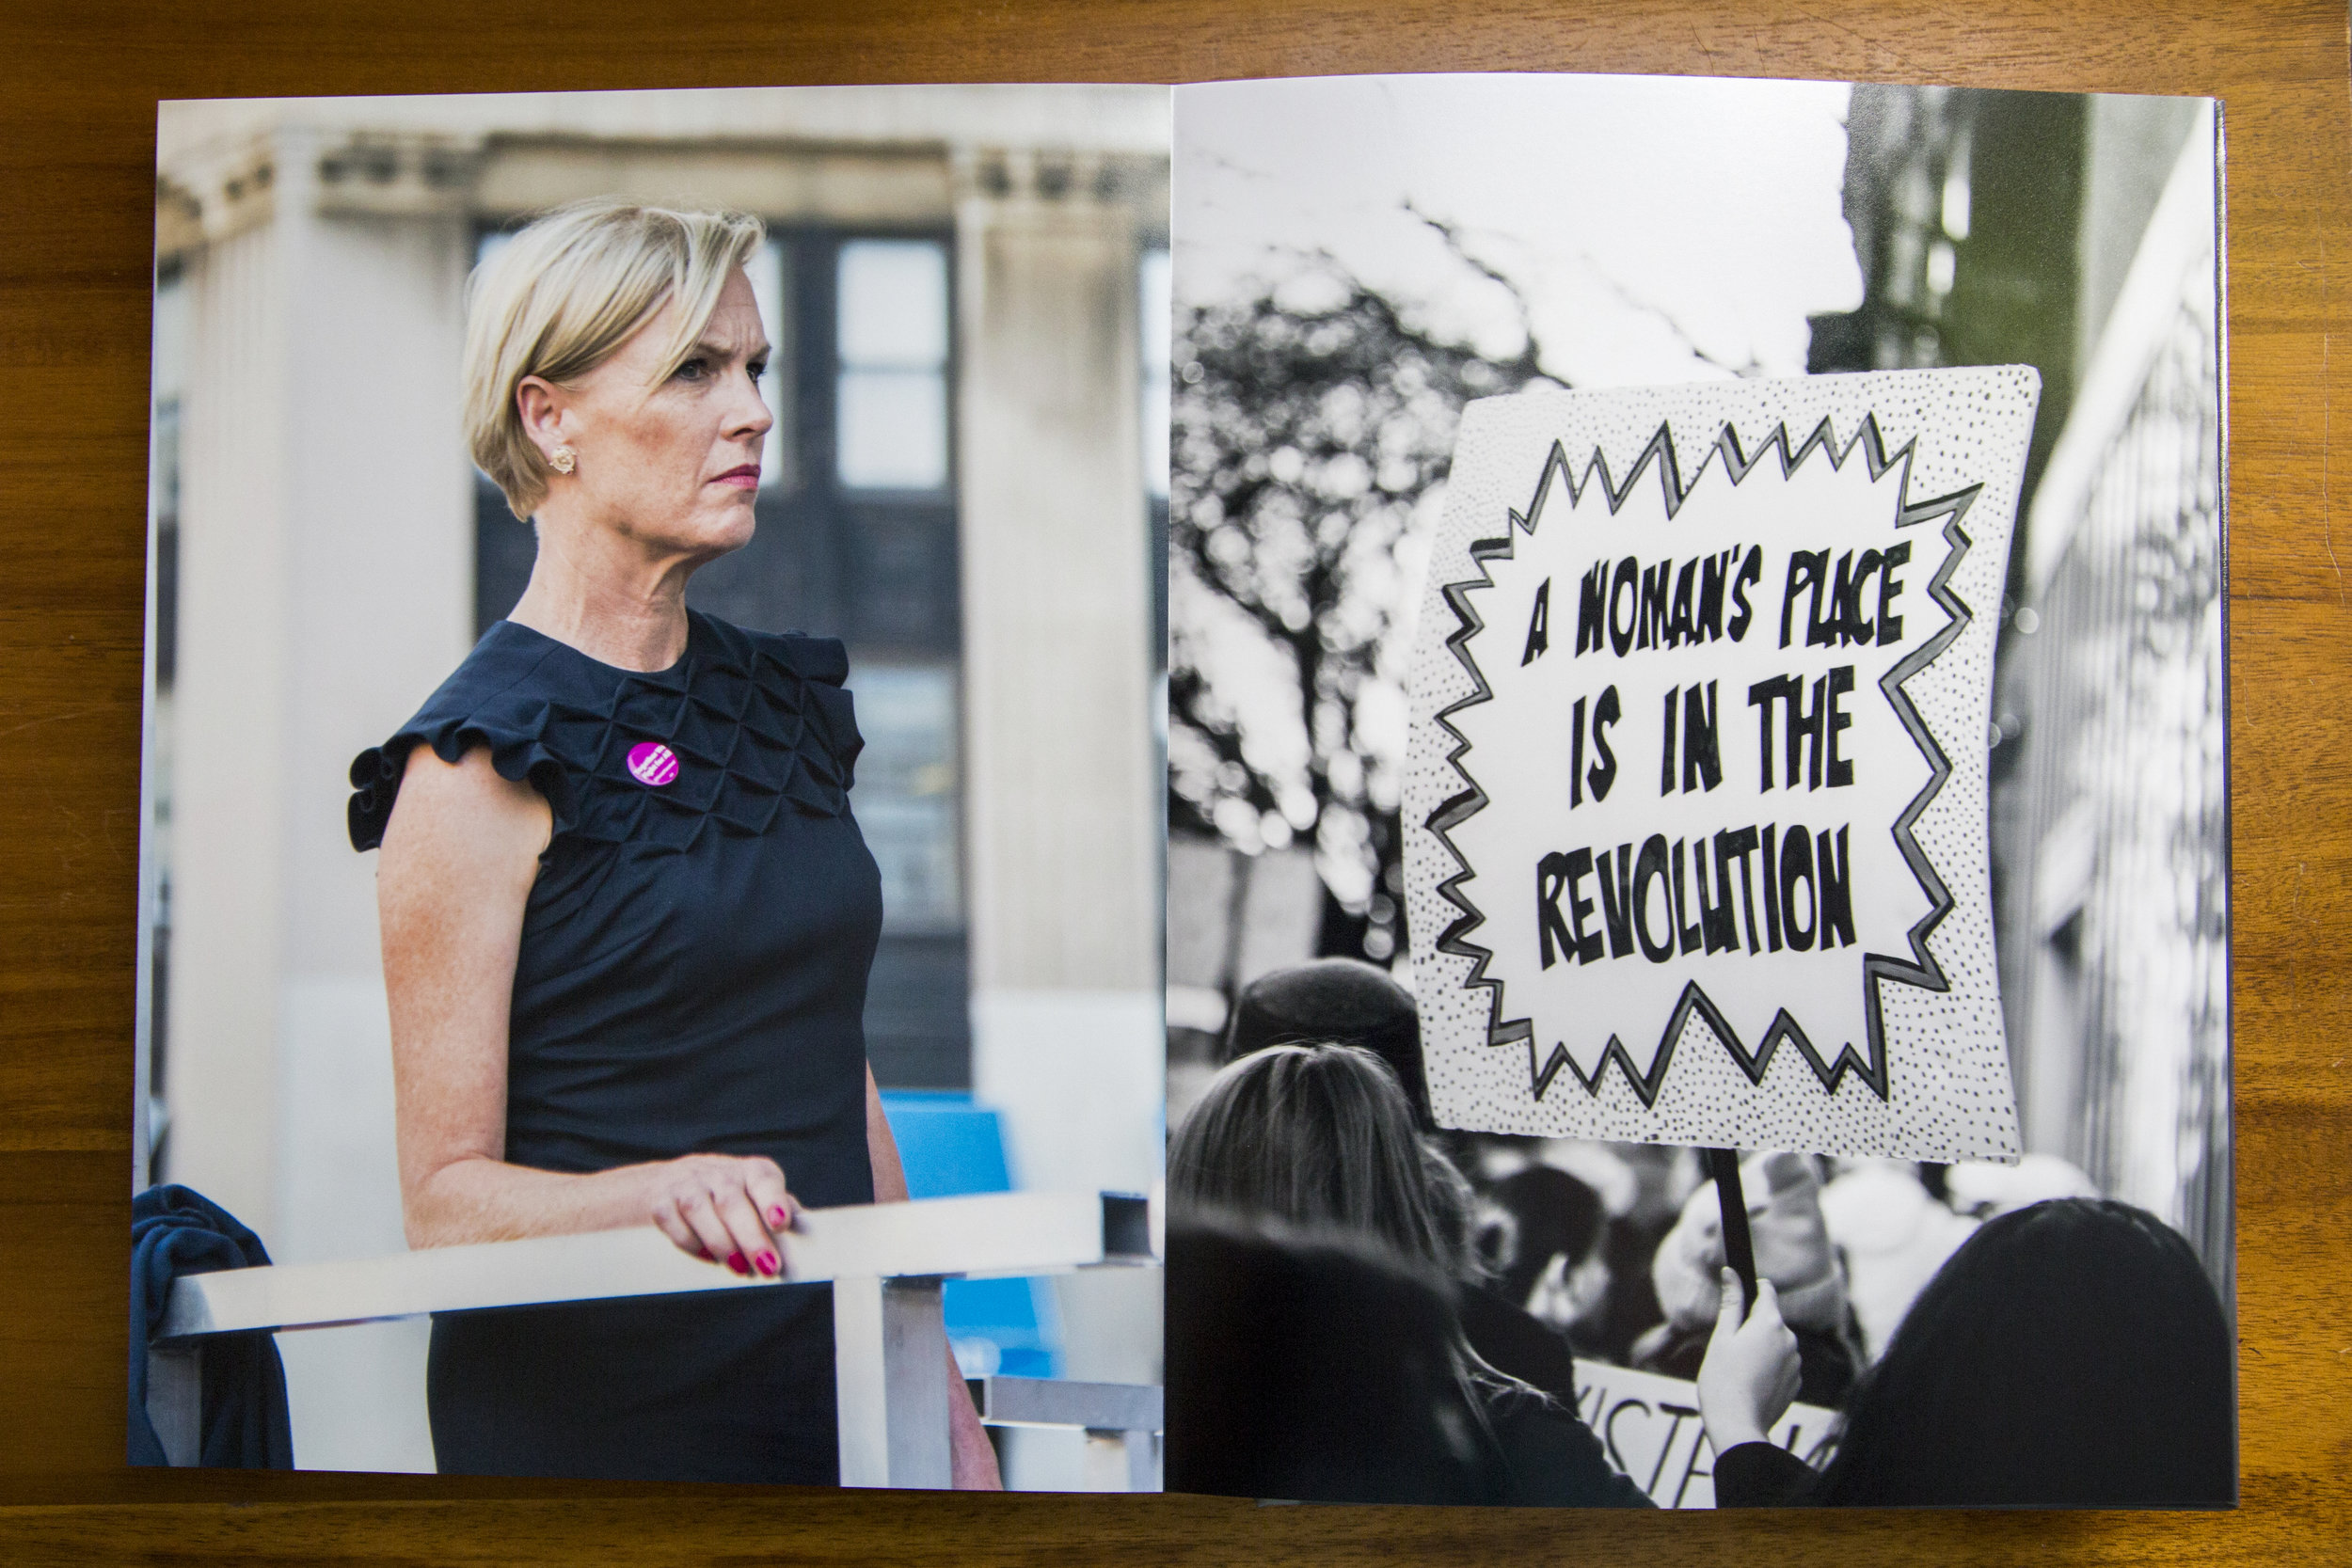 Right:&nbsp;Cecile Richards, President of Planned Parenthood, is photographed moments before approaching the podium at the May Day rally in Lower Manhattan. New York, 2017Left: “A Woman’s Place is in the Revolution” handmade protest sign at the Wome…